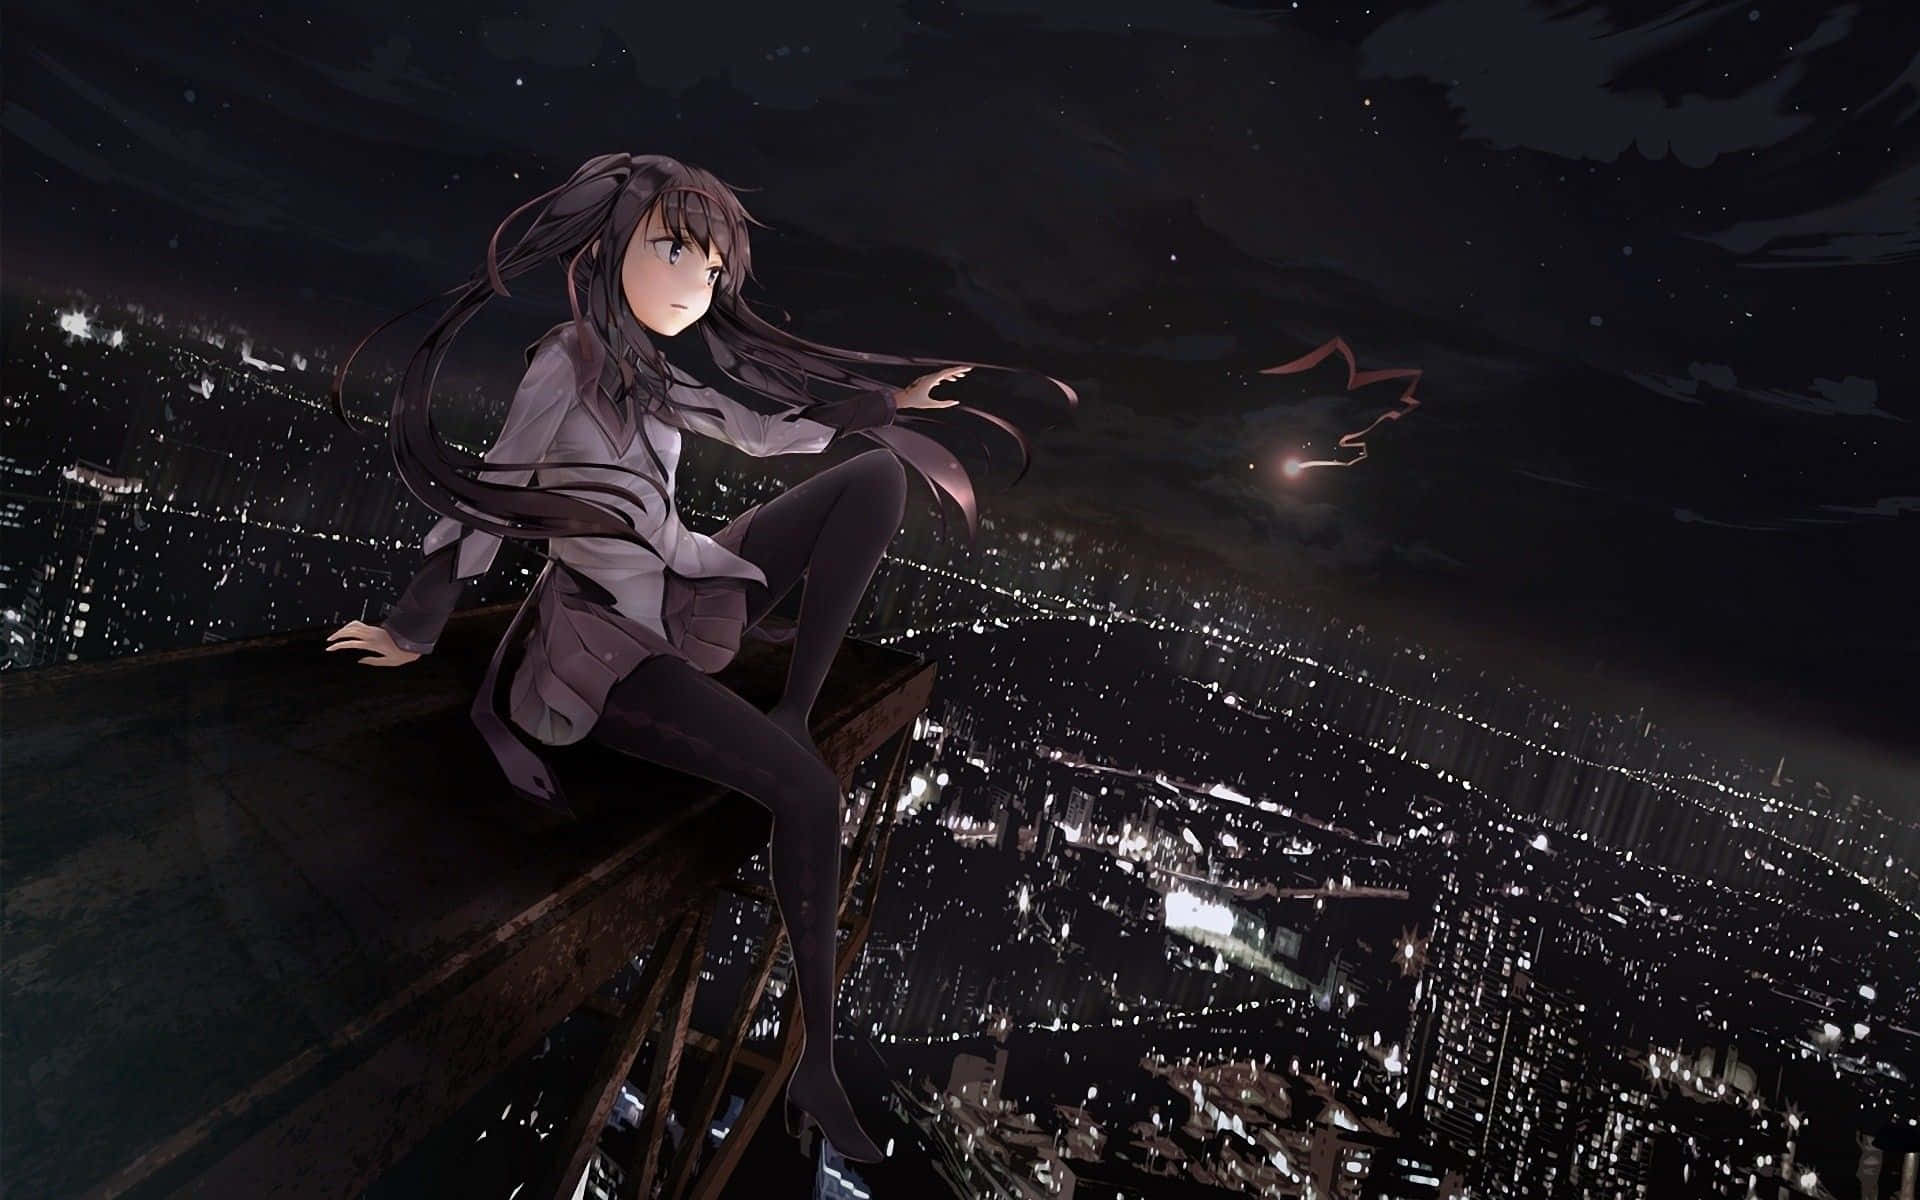 A Girl Sitting On A Ledge In A City At Night Background